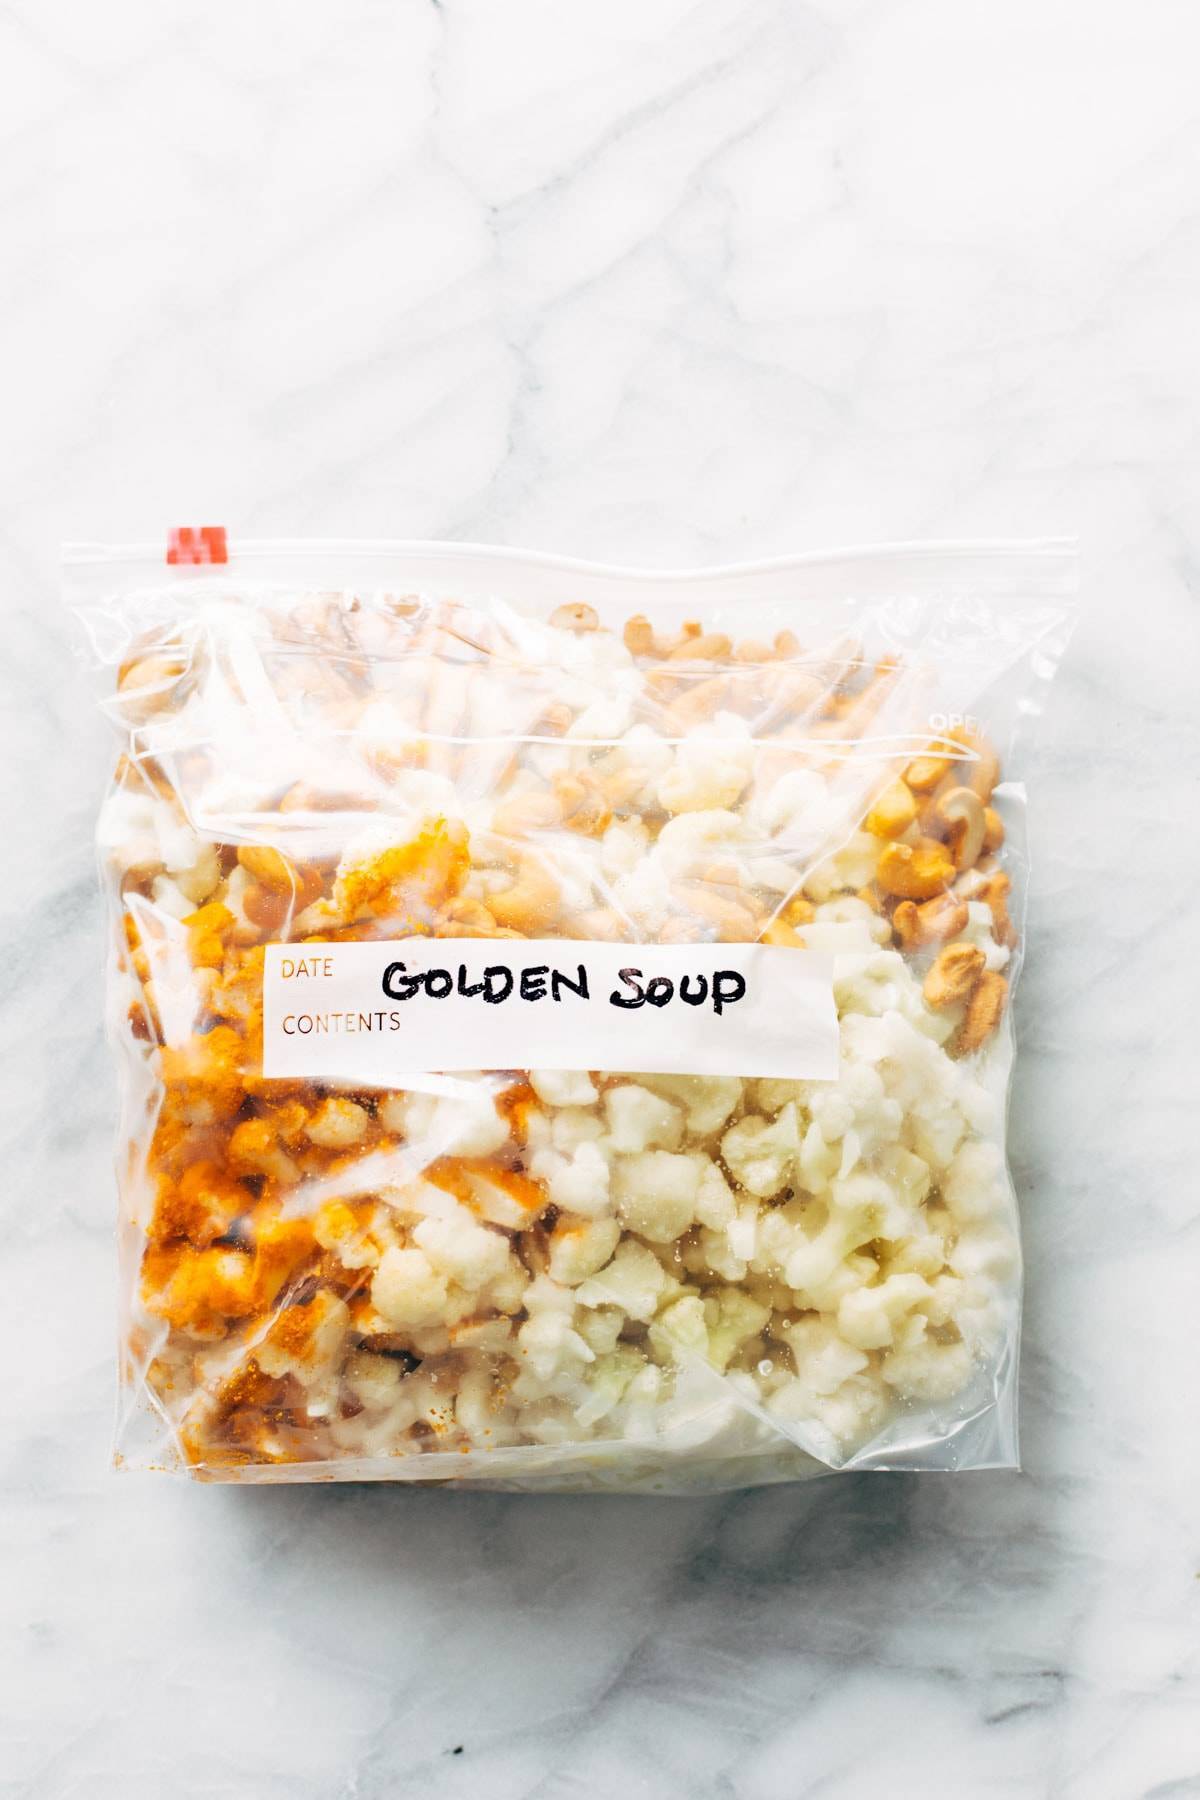 A clear bag labeled Golden Soup.